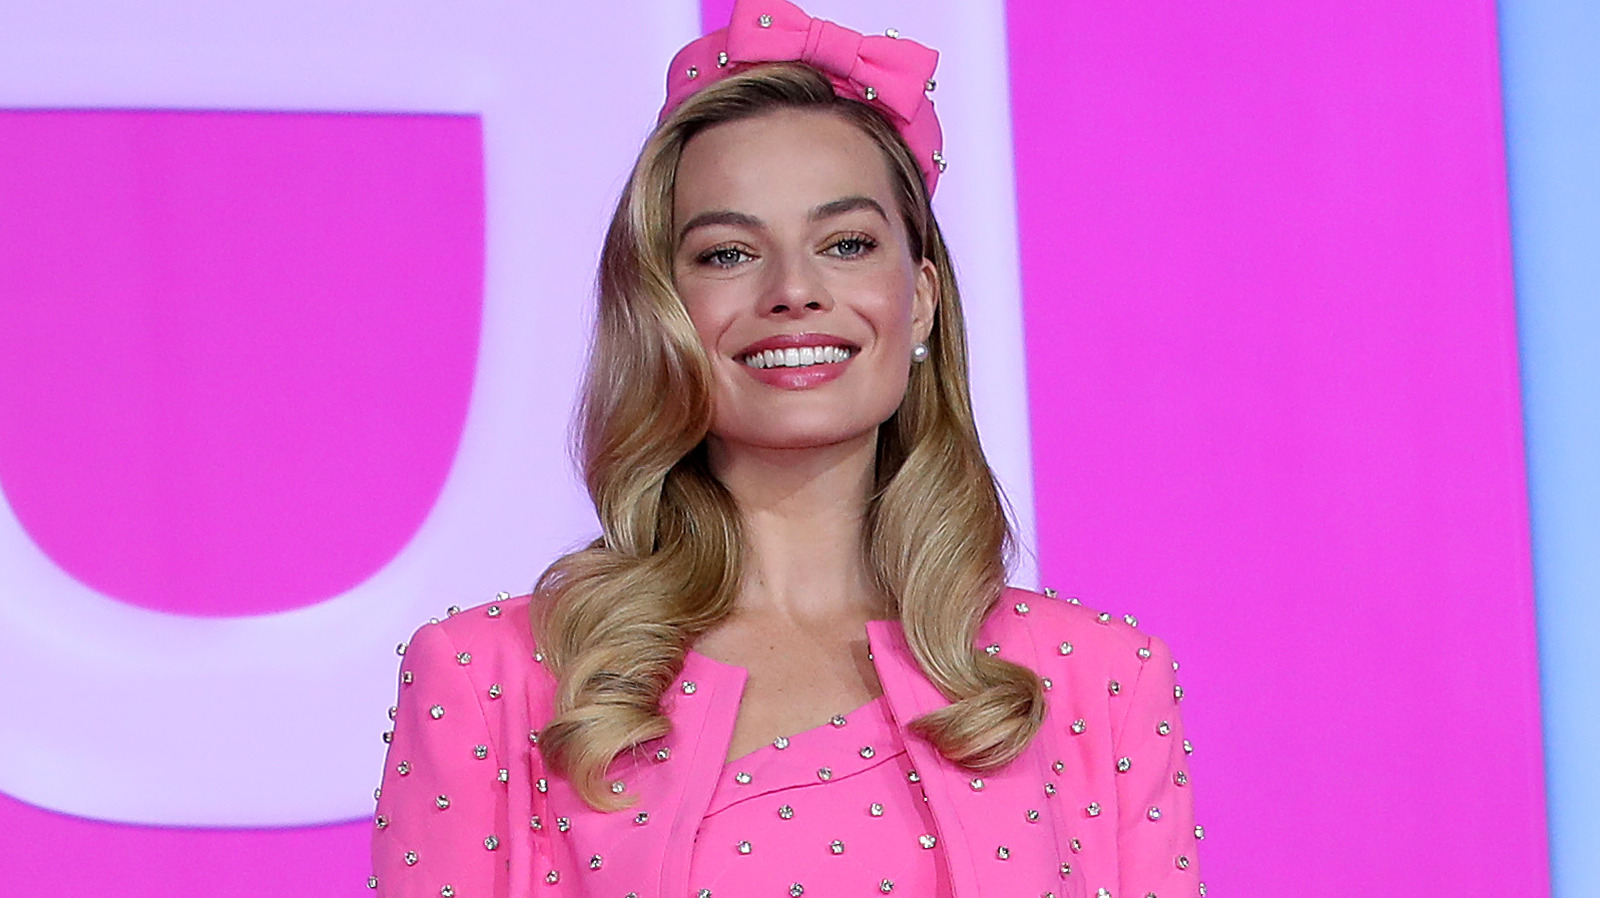 BarbieCore is look of summer 2022 thanks to Margot Robbie